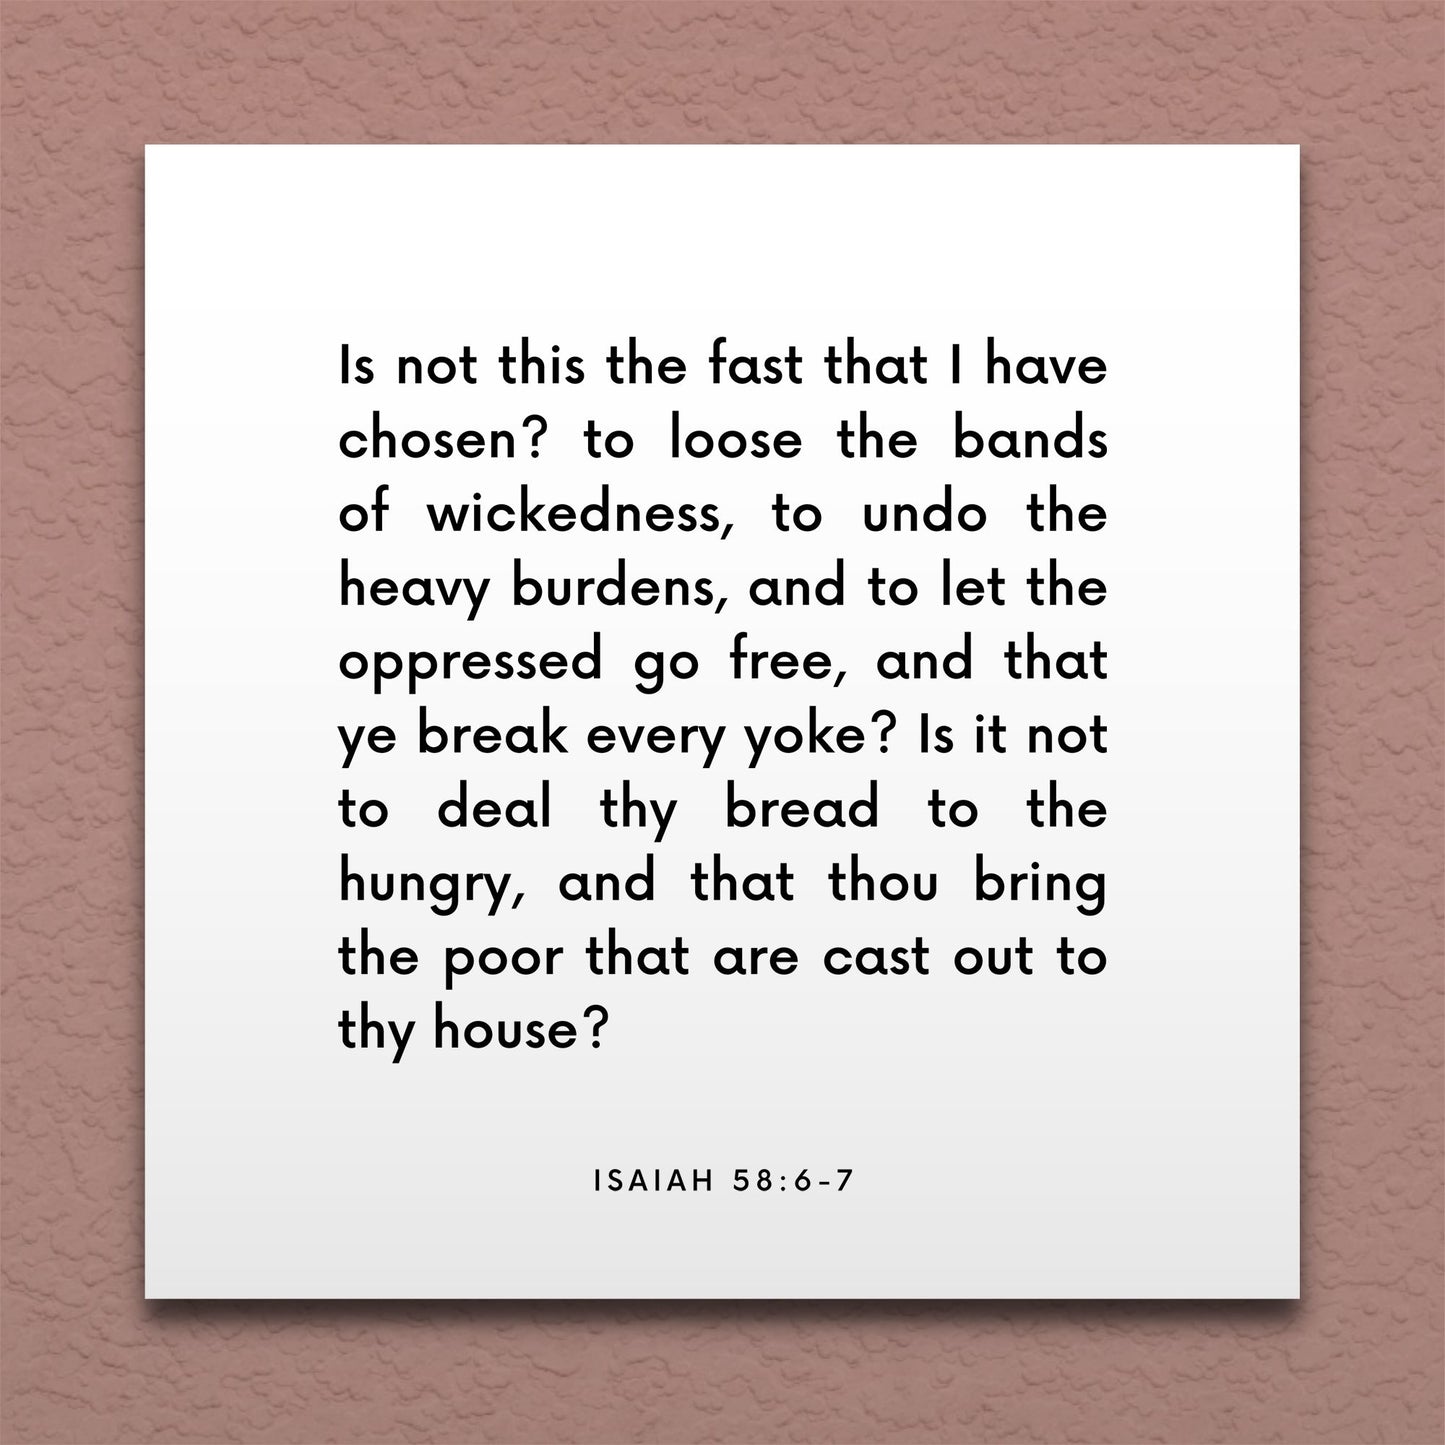 Wall-mounted scripture tile for Isaiah 58:6-7 - "Is not this the fast that I have chosen?"